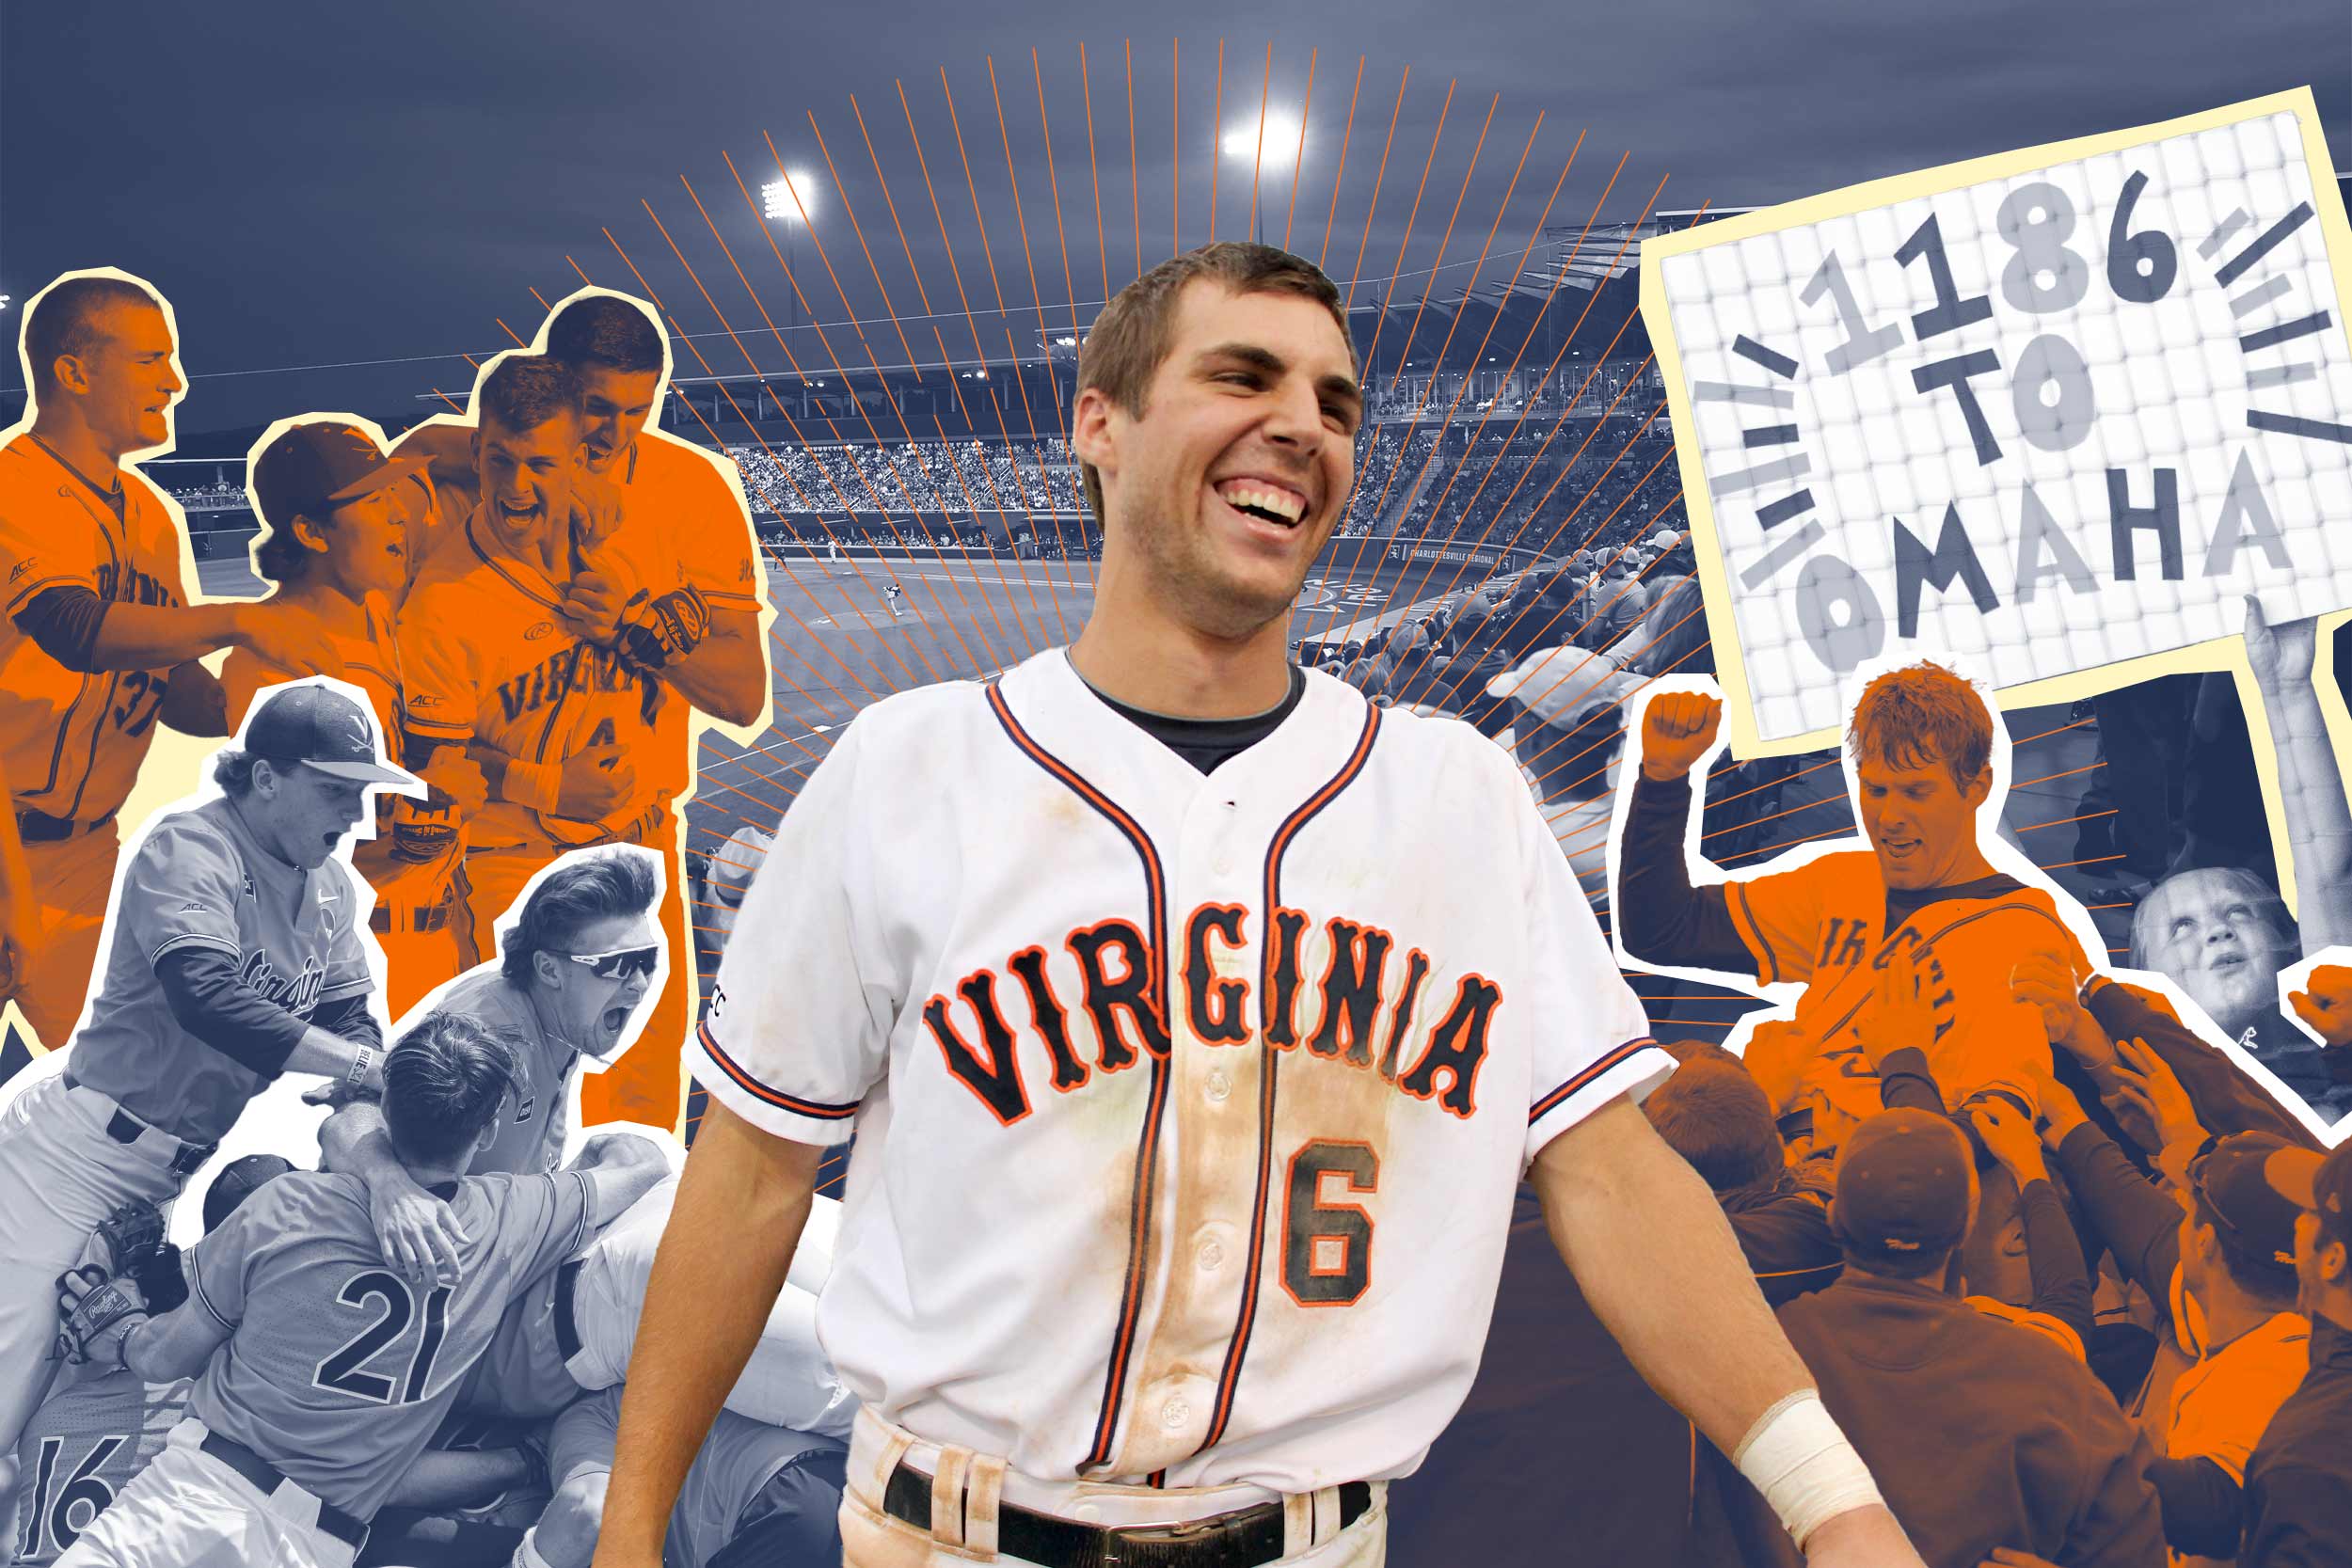 A colored collage of UVA blue and orange baseball players through the years